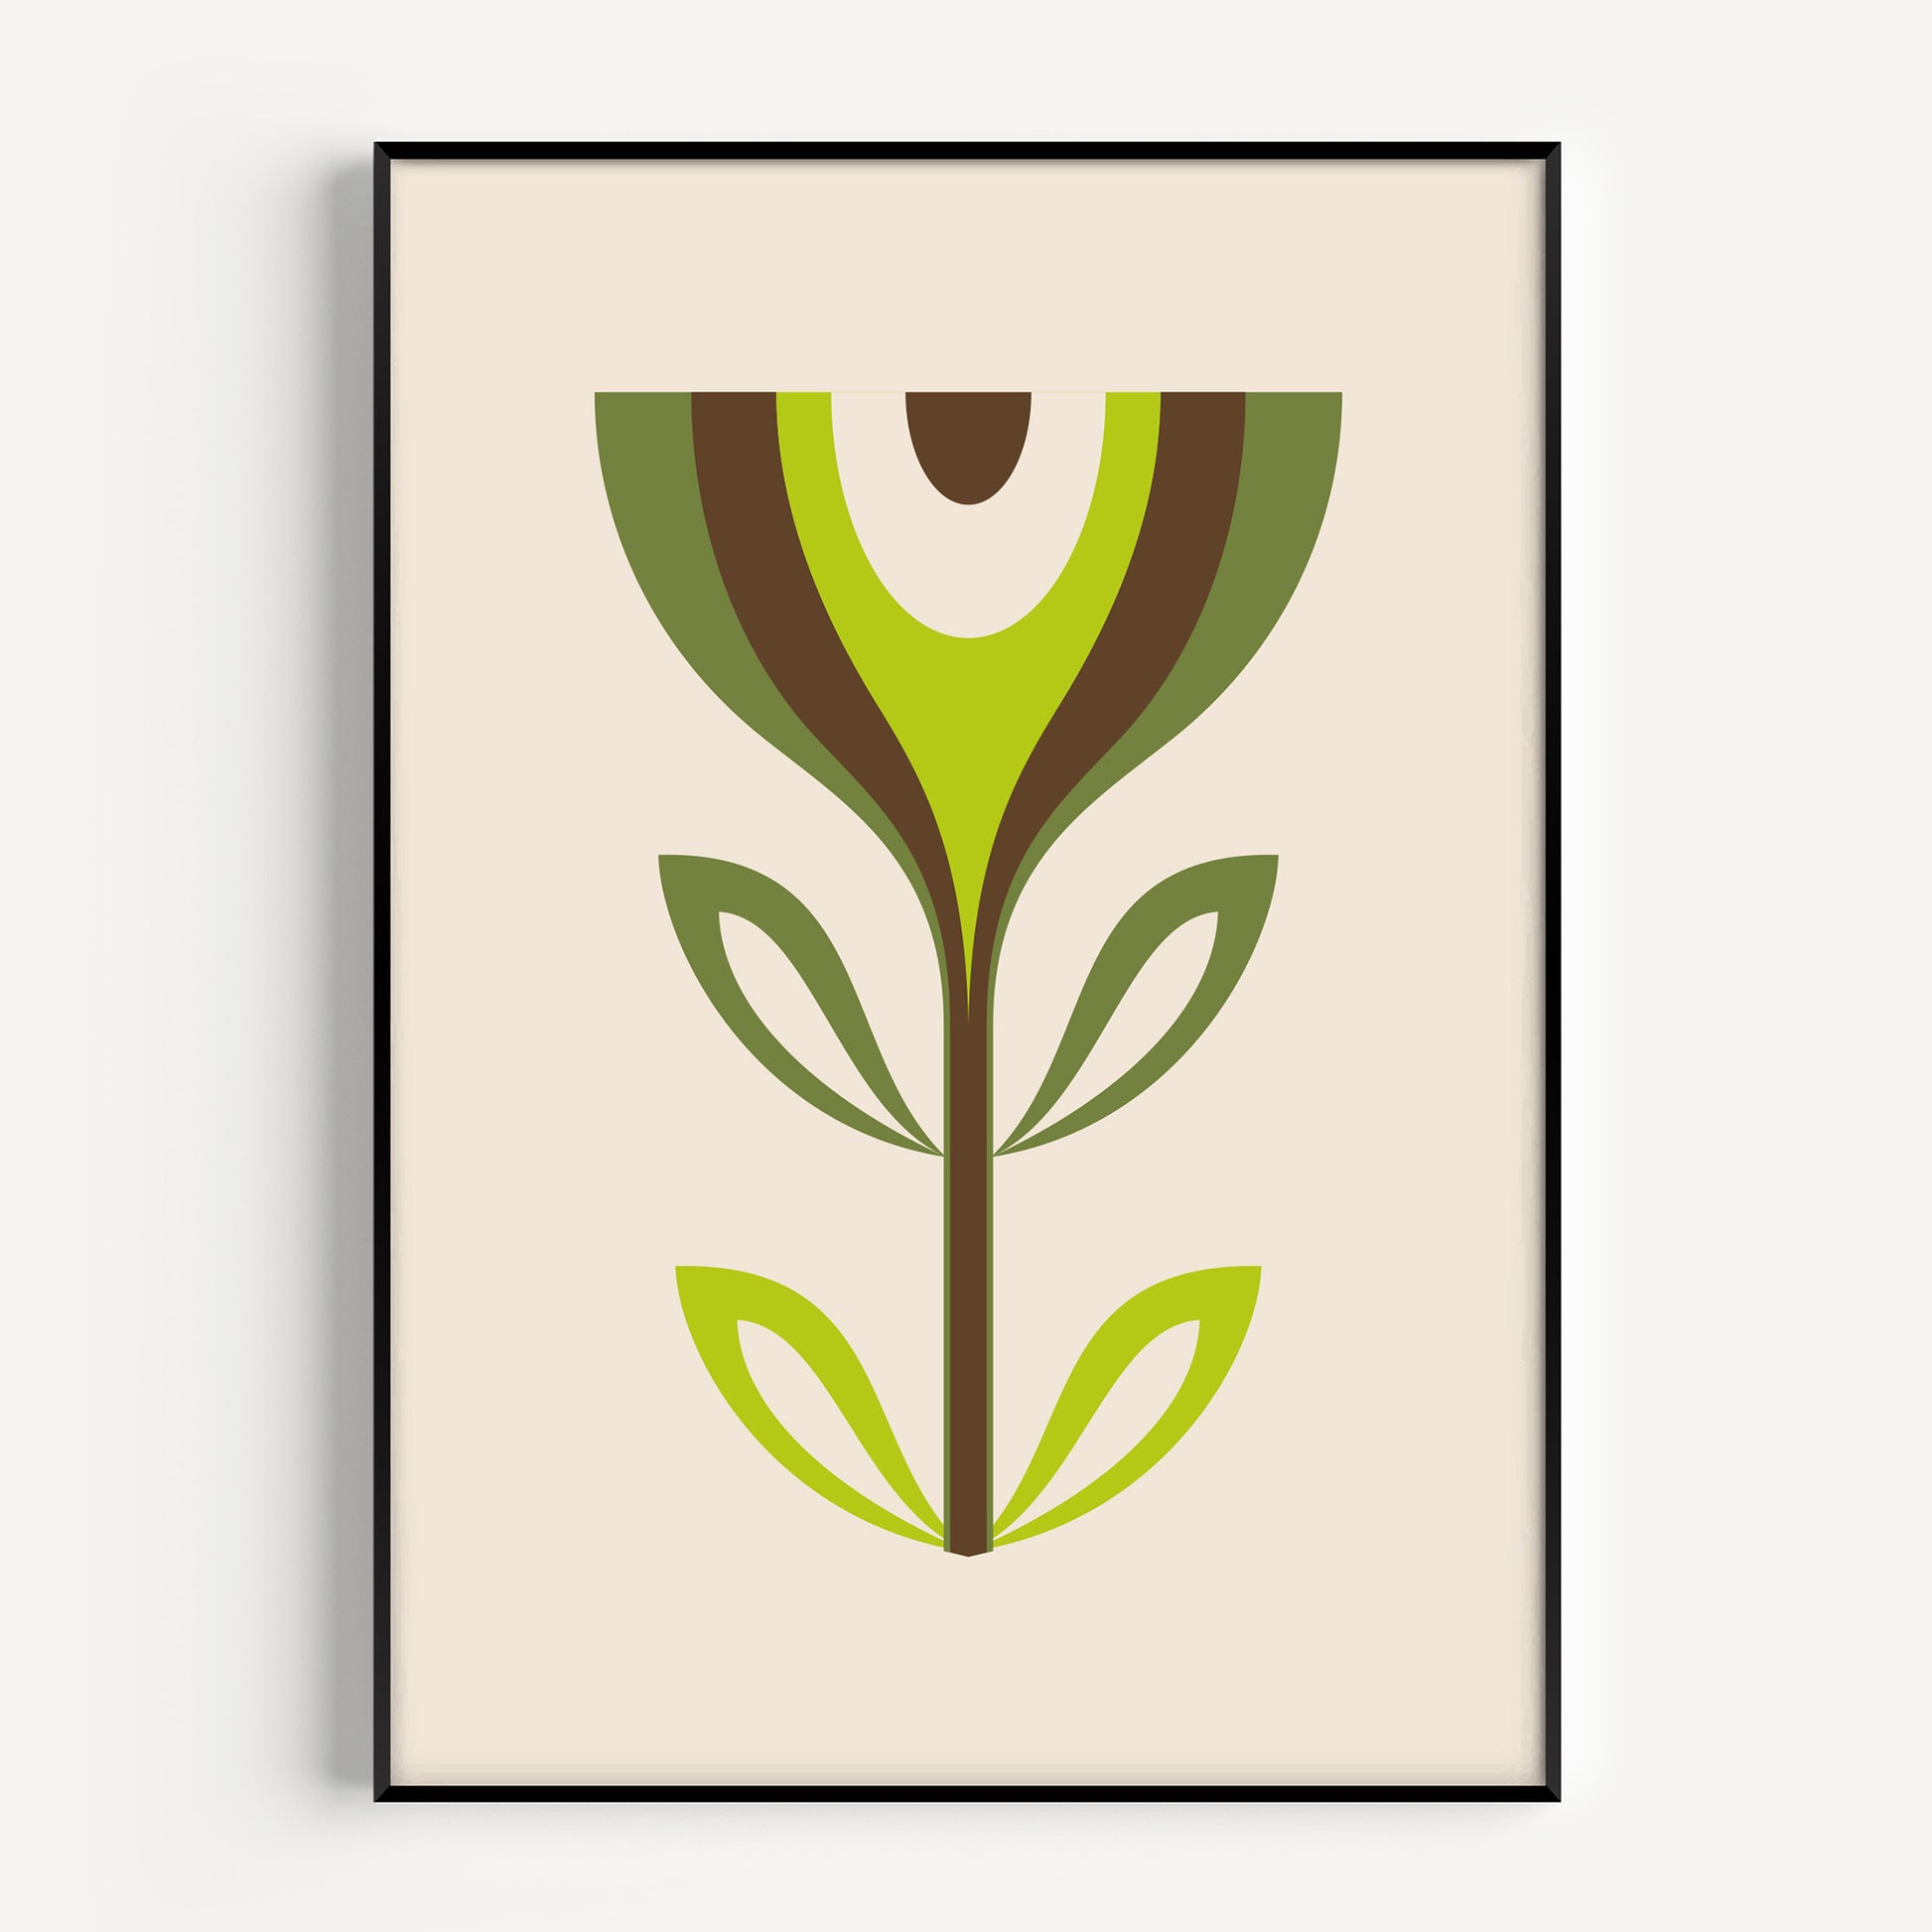 Wall art print in a mid century modern style in green